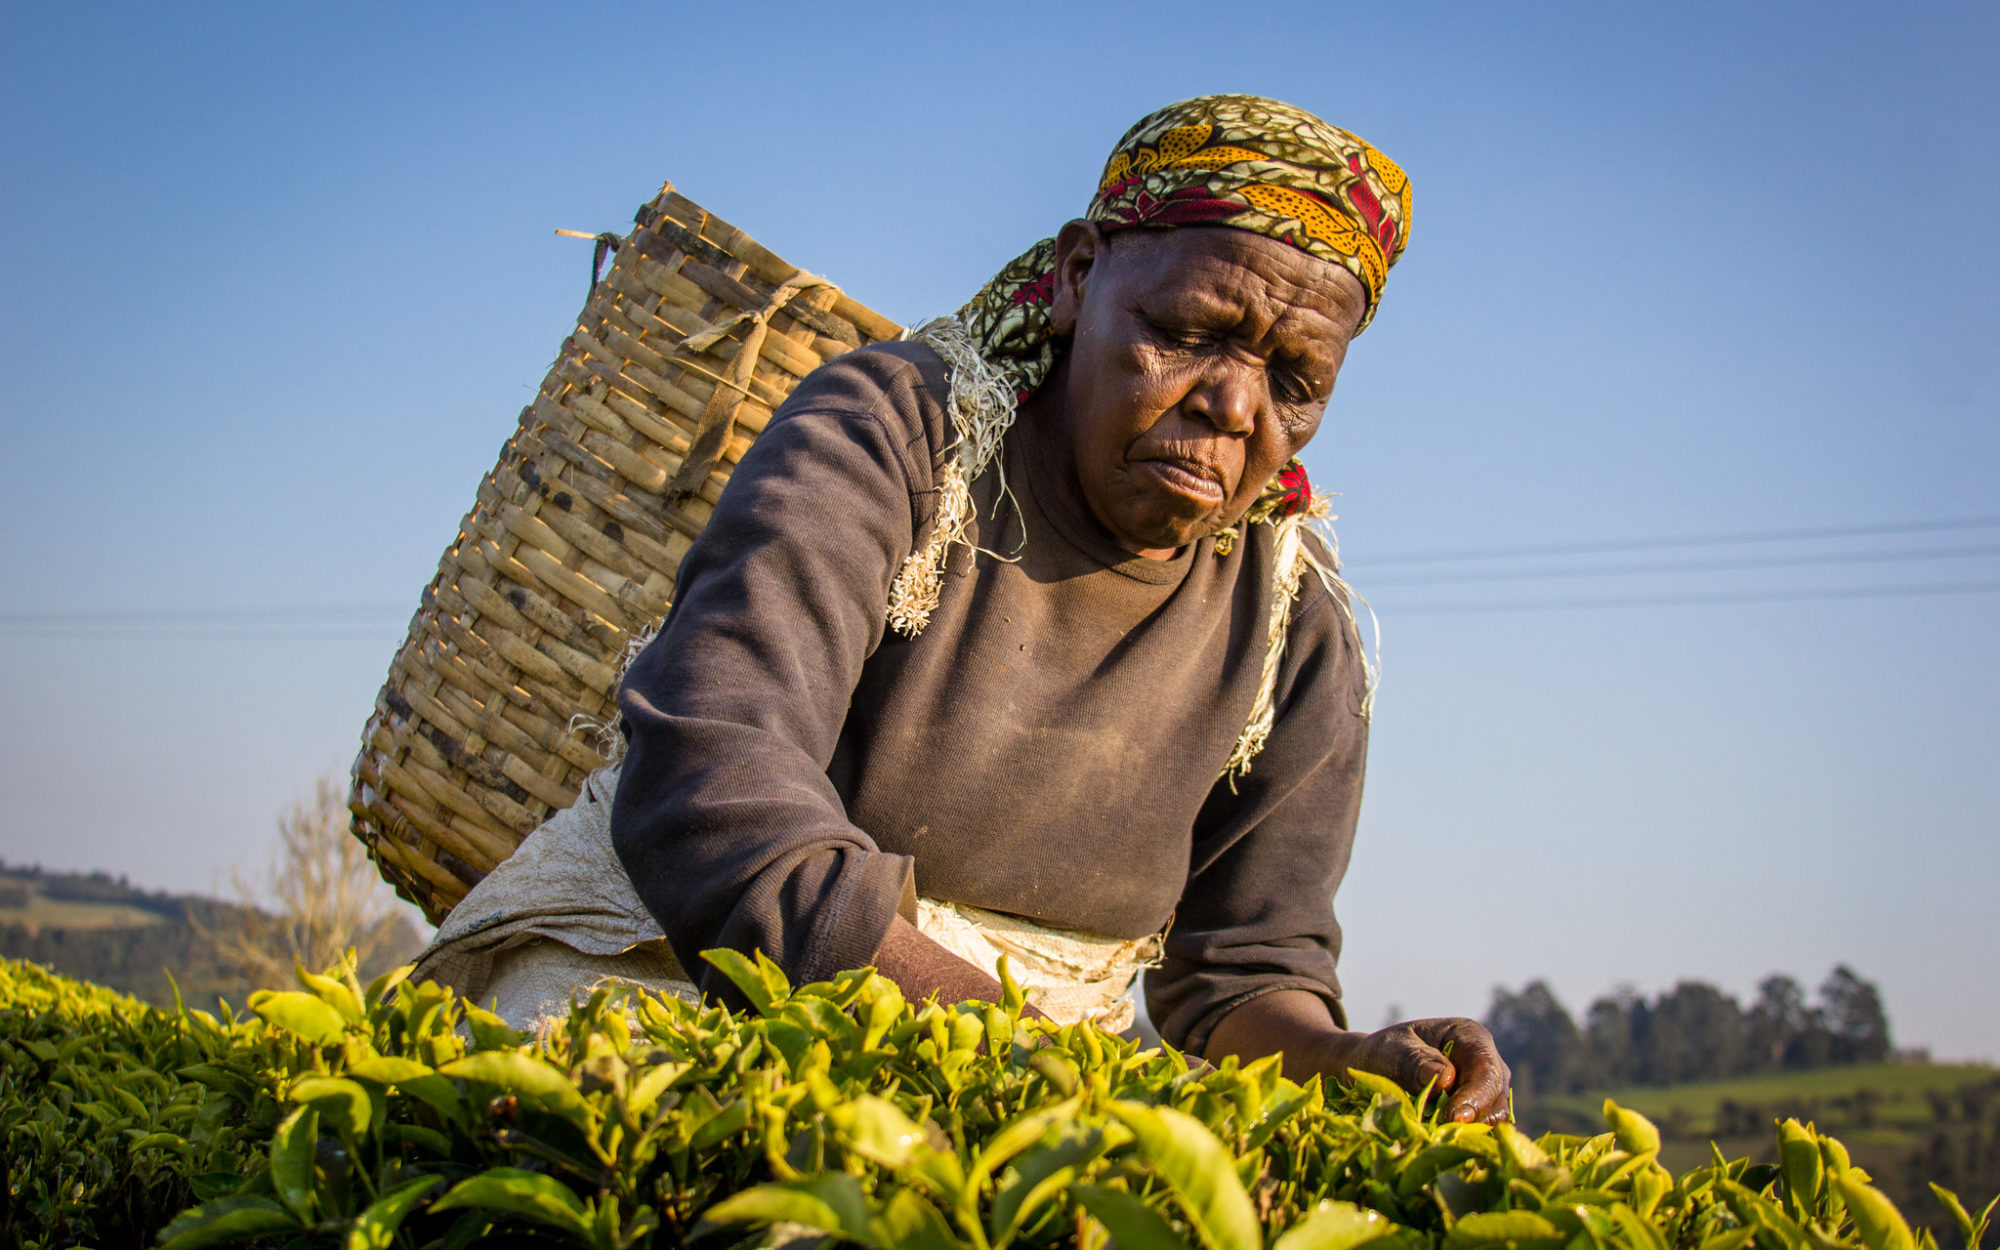 Tanzania Tea pickers for Rainforest Alliance Unilever story - image by CIFOR